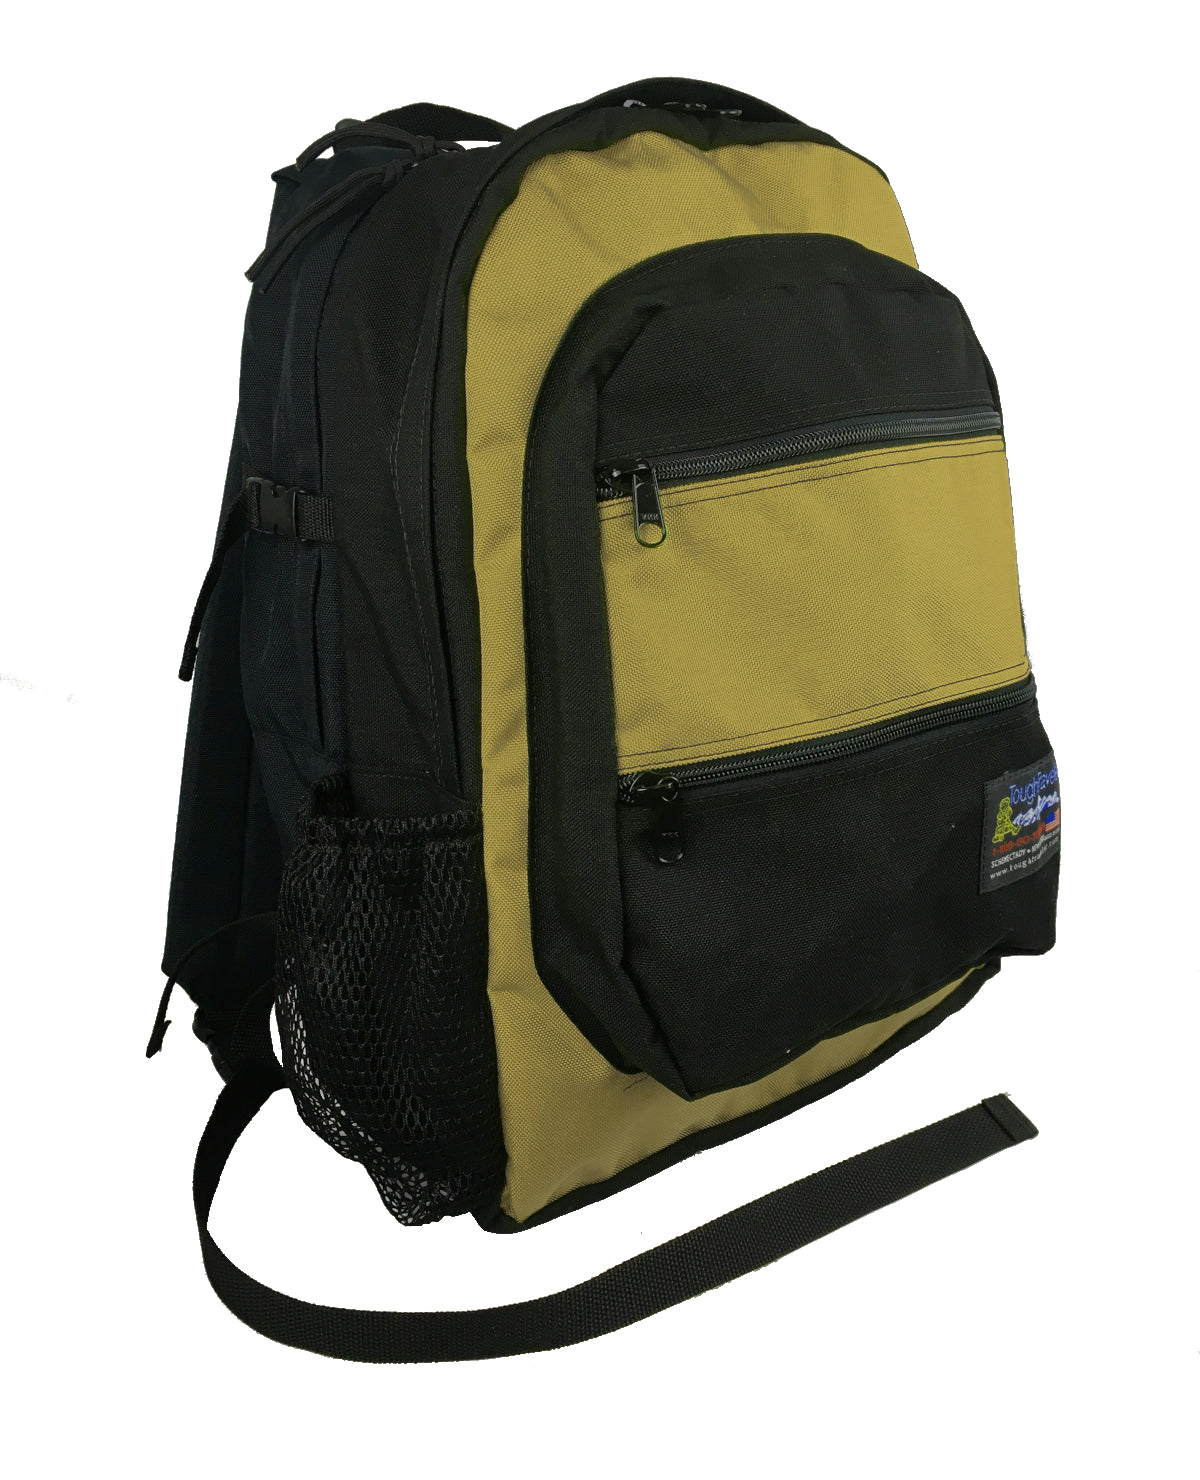 TOUCOM Computer Backpack